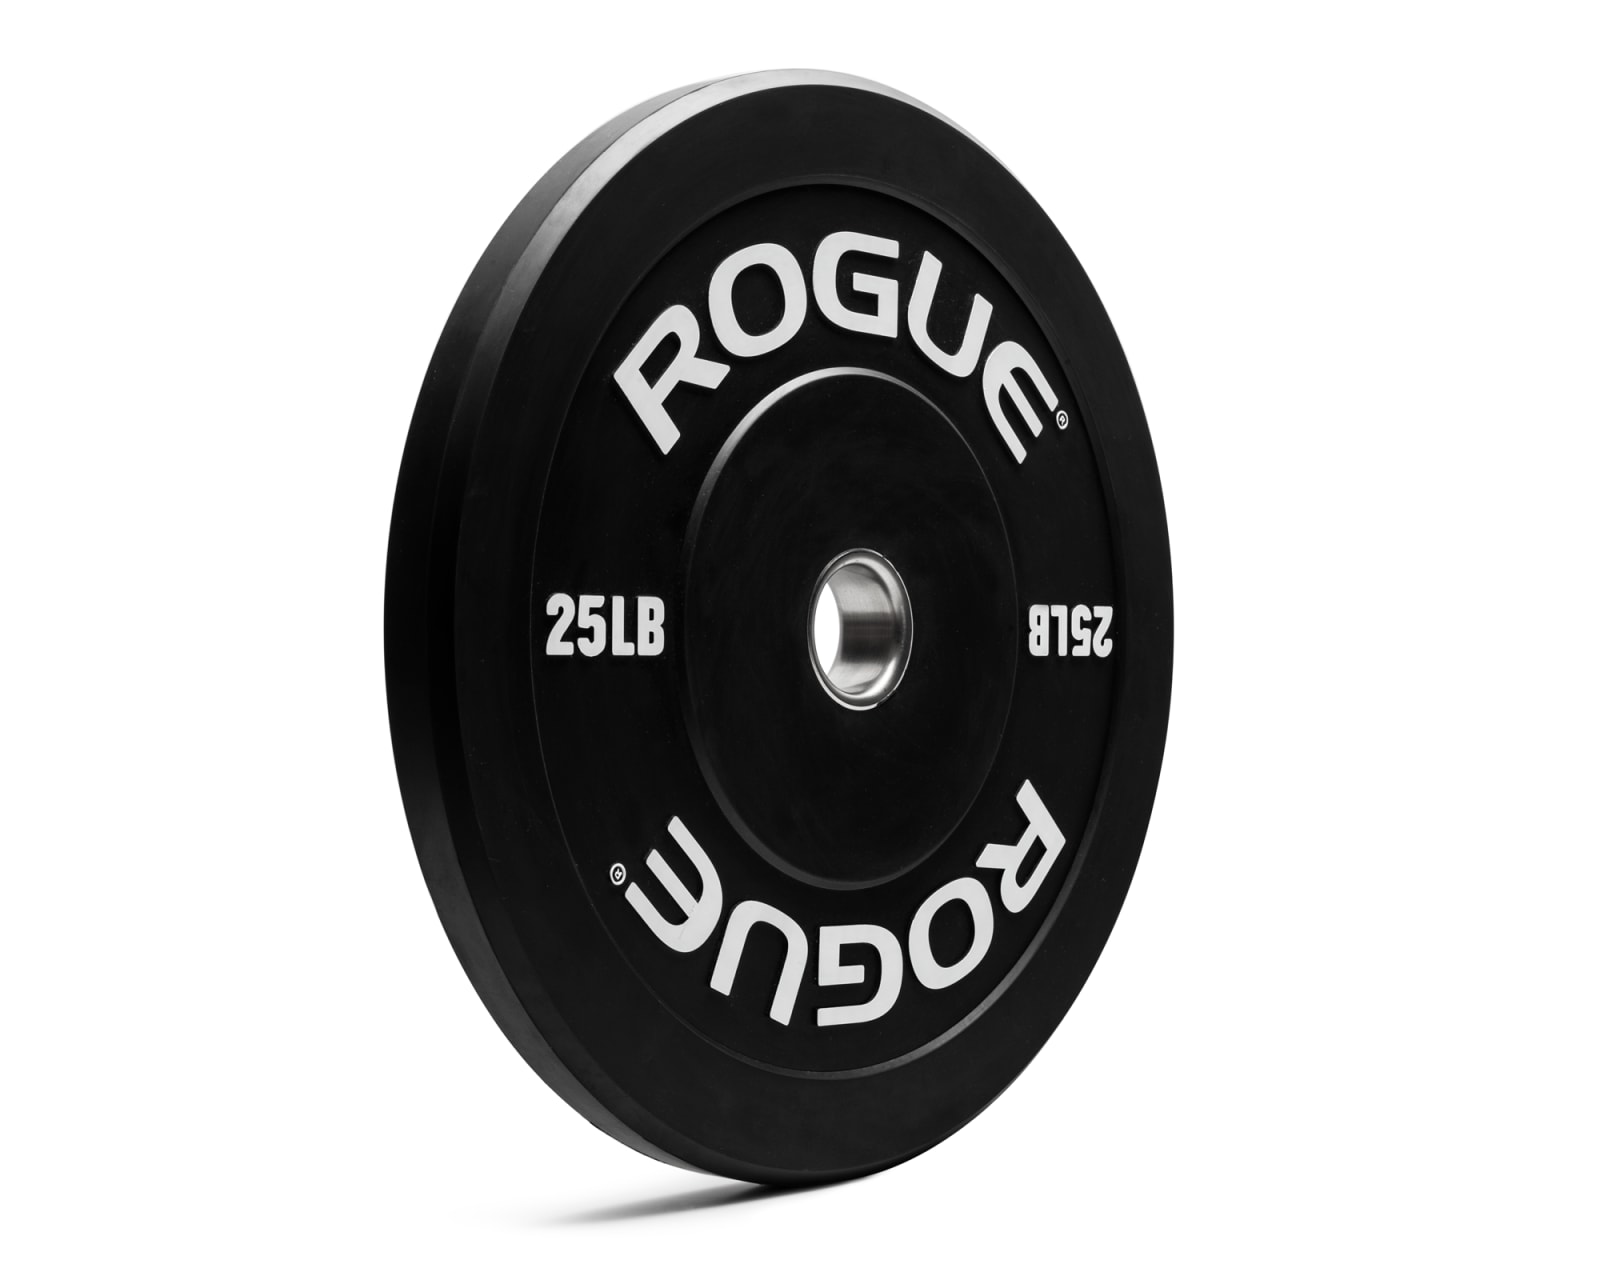 Set of 2 ✈️SHIPS PRIORITY 2 DAY✈️ ROGUE Fitness Echo Bumper Plates 25 lb PAIR 